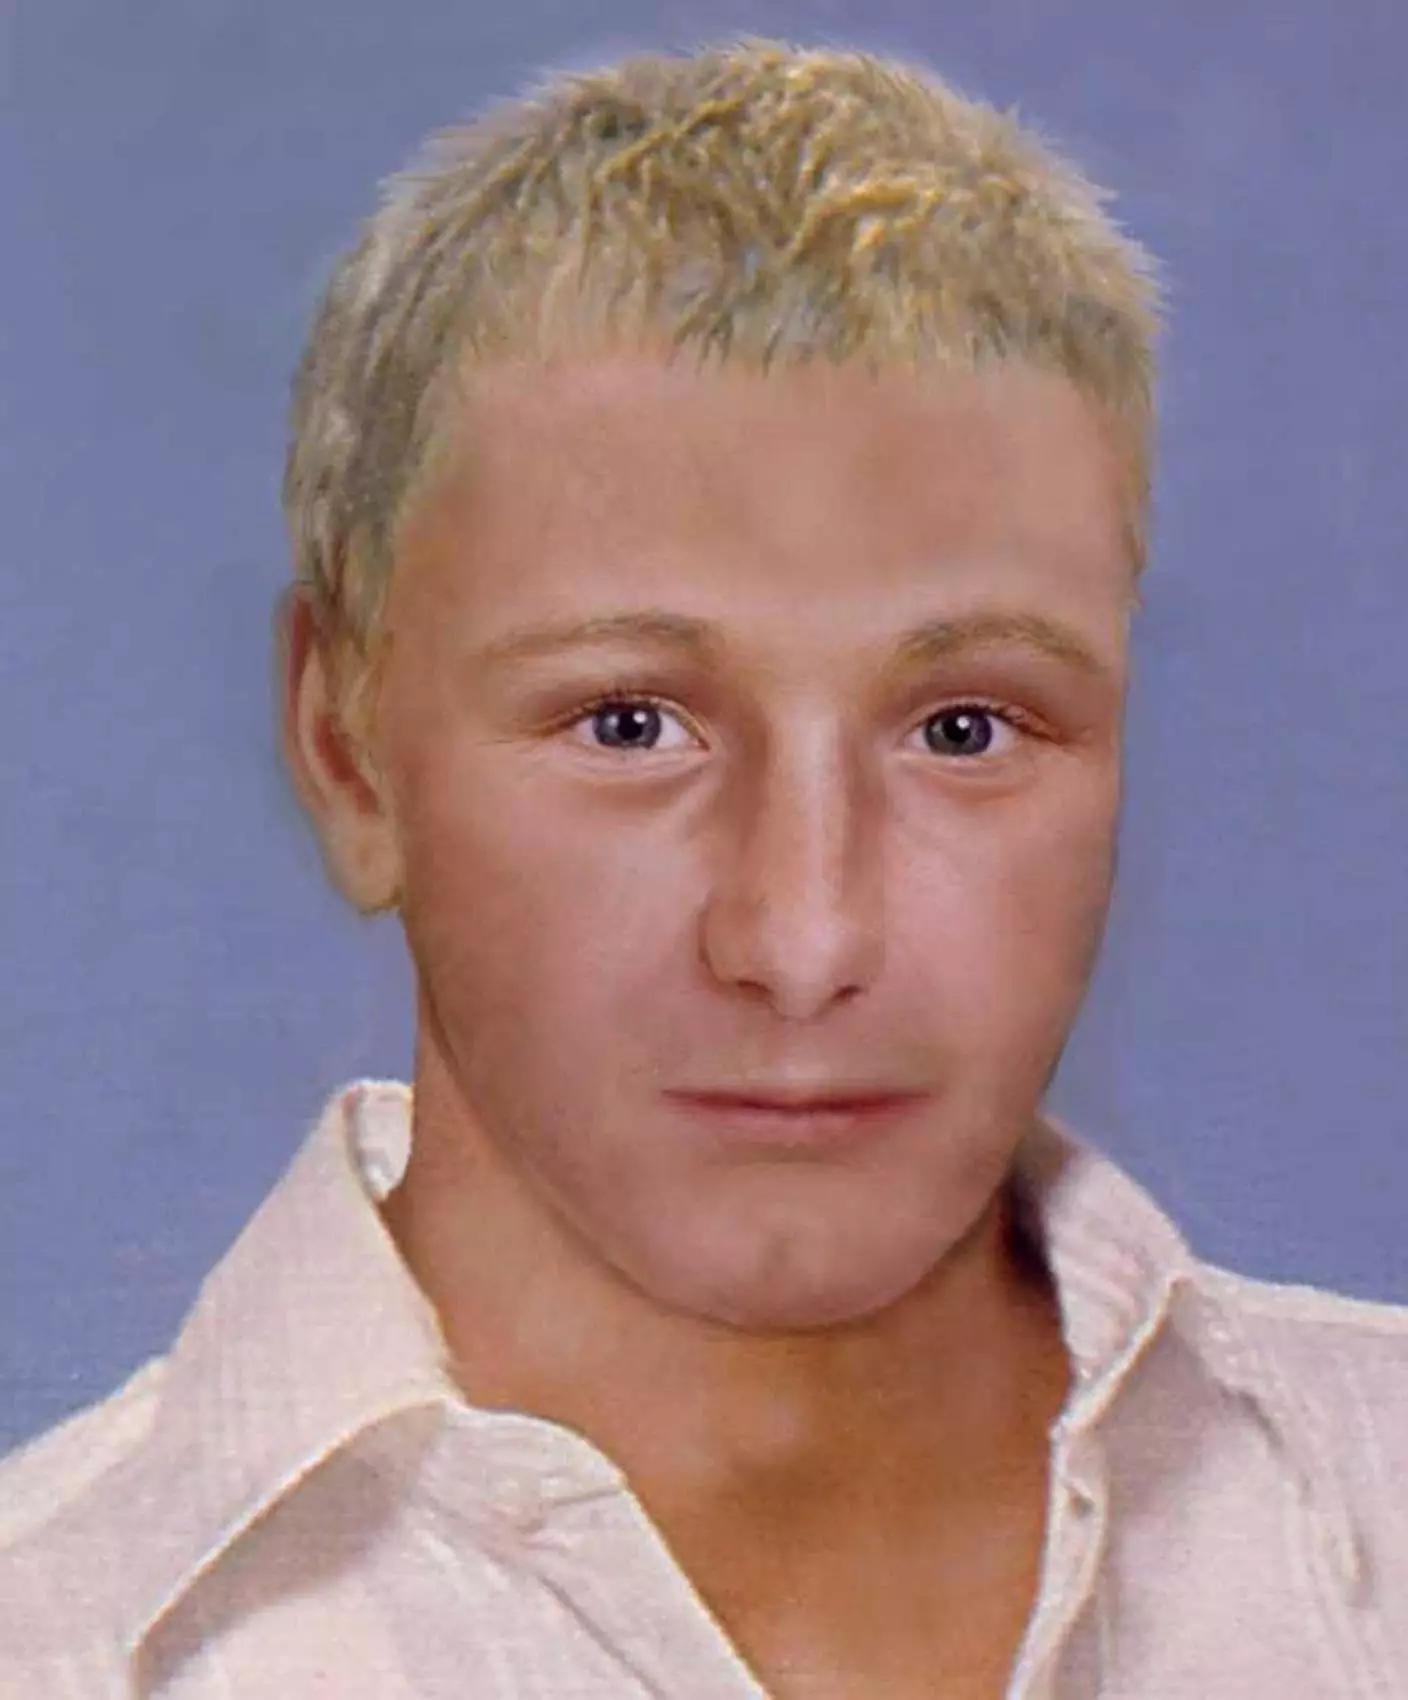 National Missing Person's Bureau handout photo of a digital created image of Ben Needham and how he was expected to look aged 18.